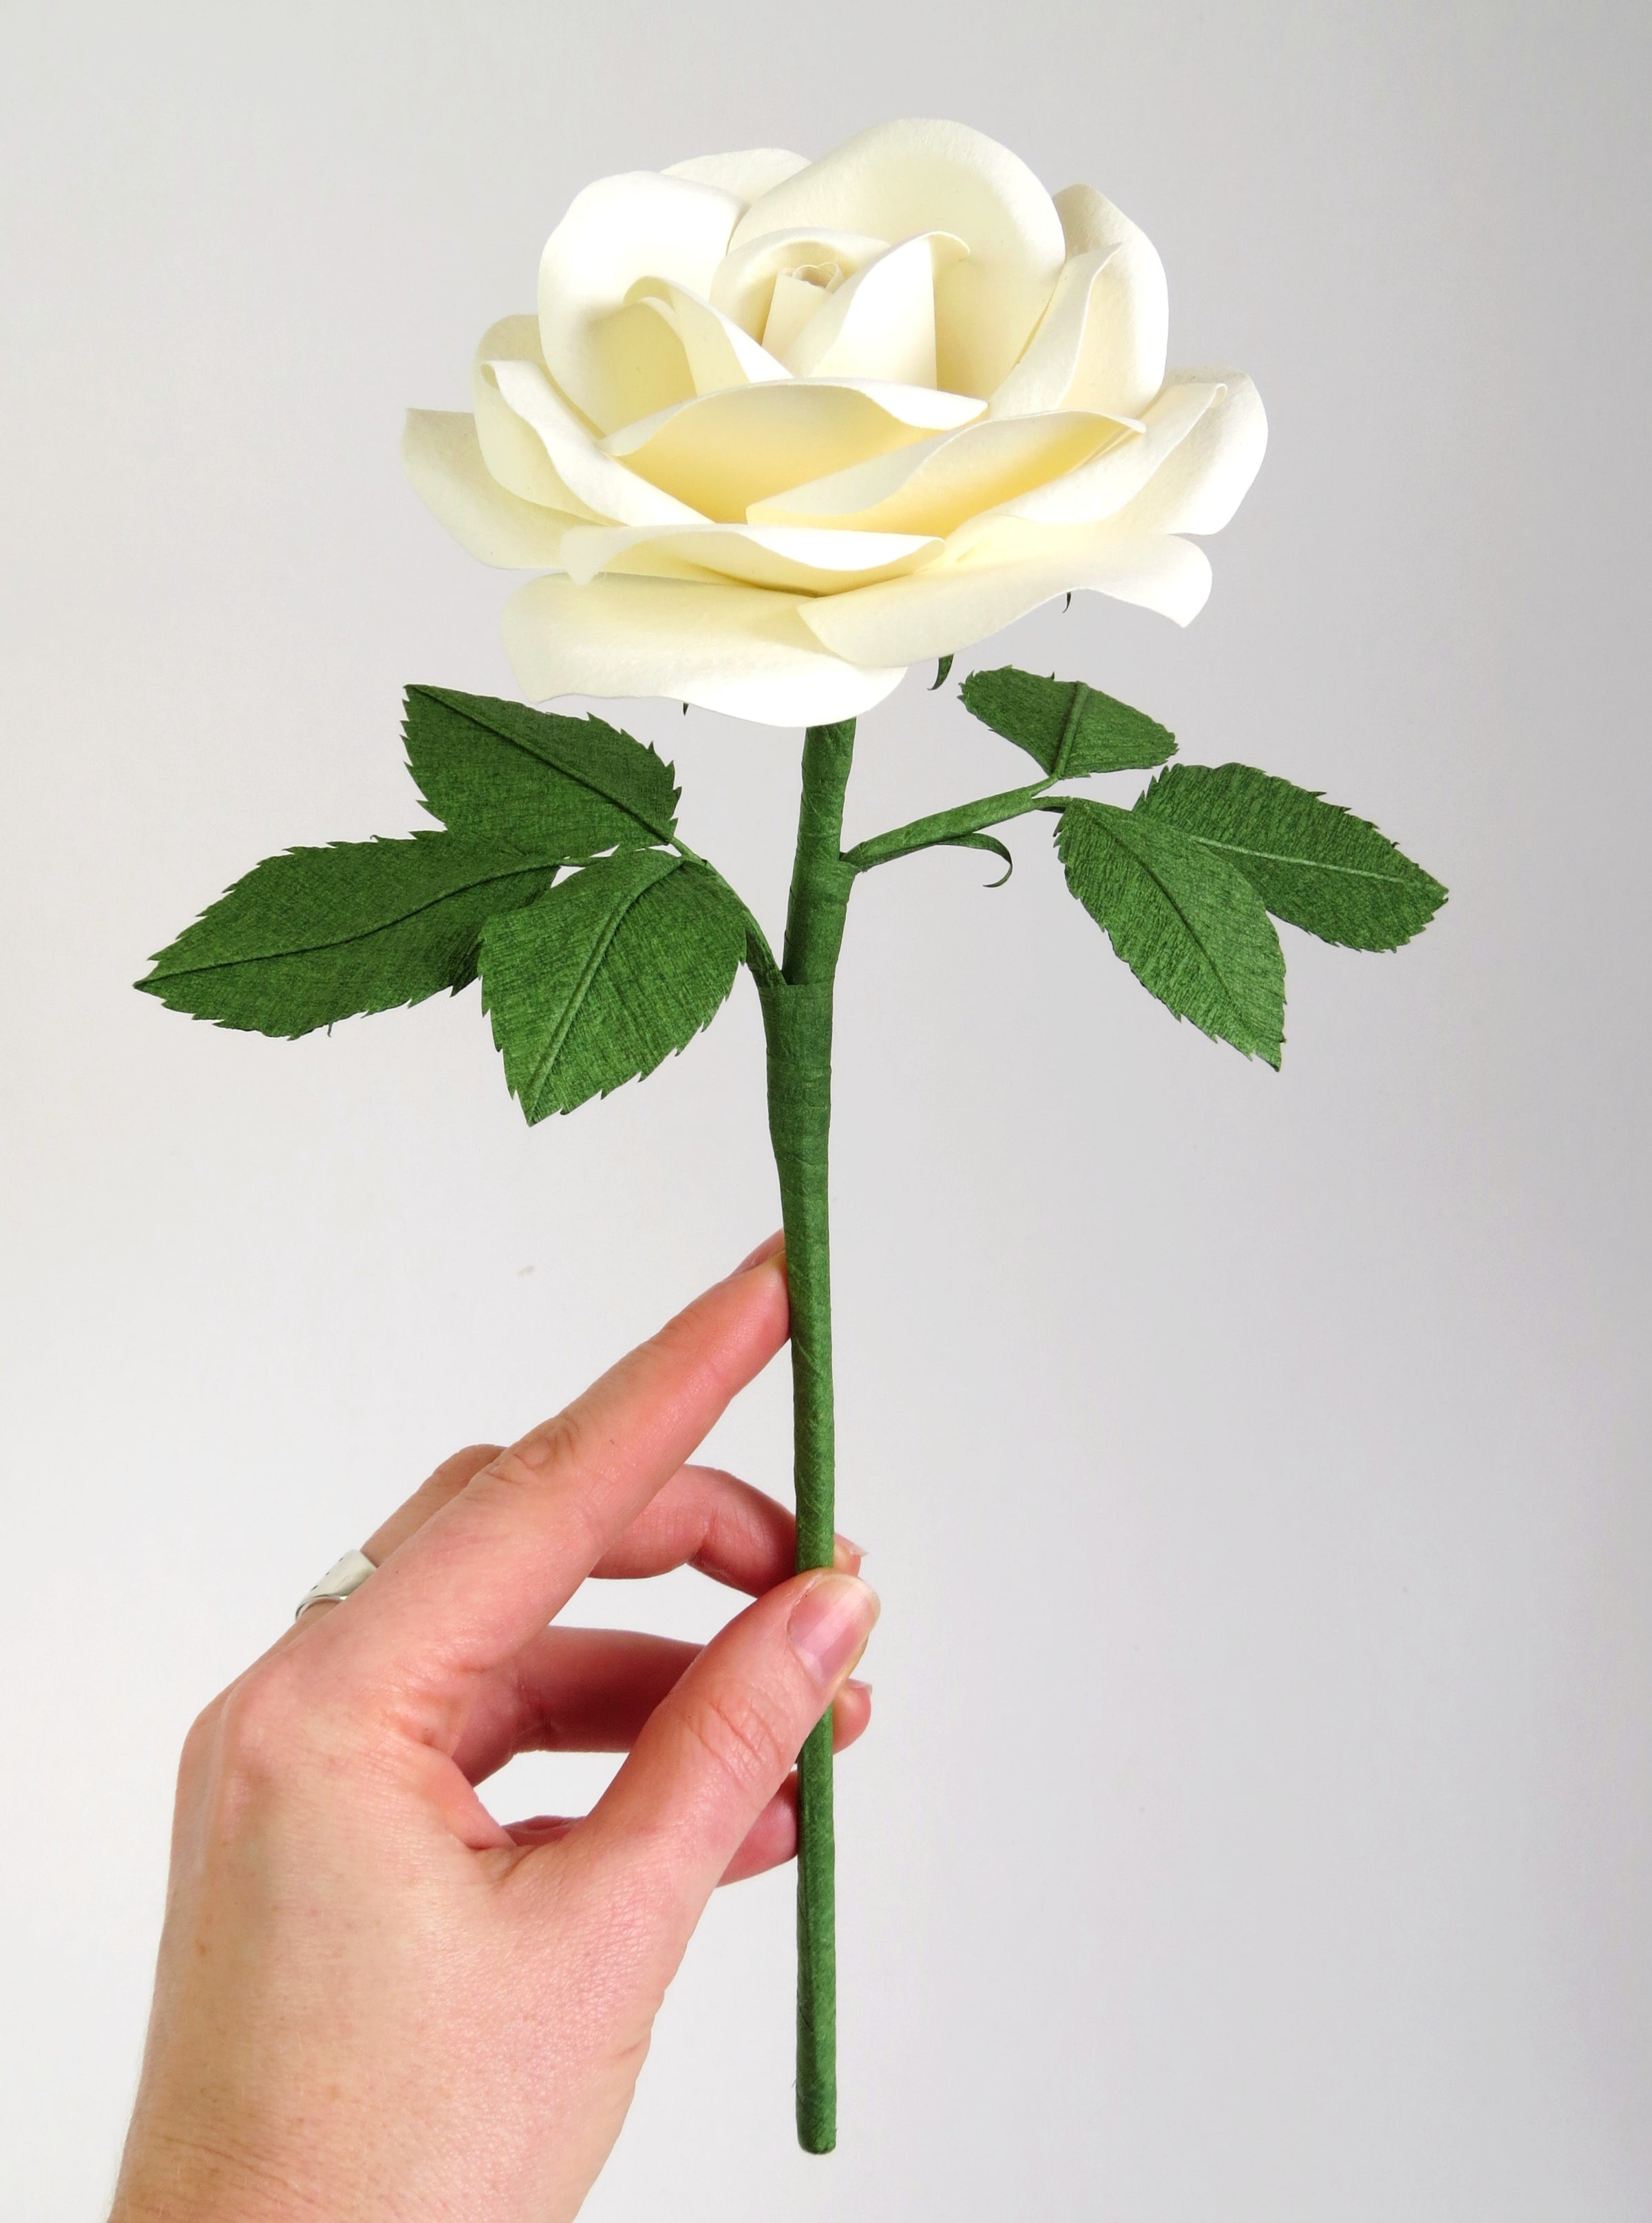 Pale white hand delicately holding the stem of a white cotton paper rose with six green leaves